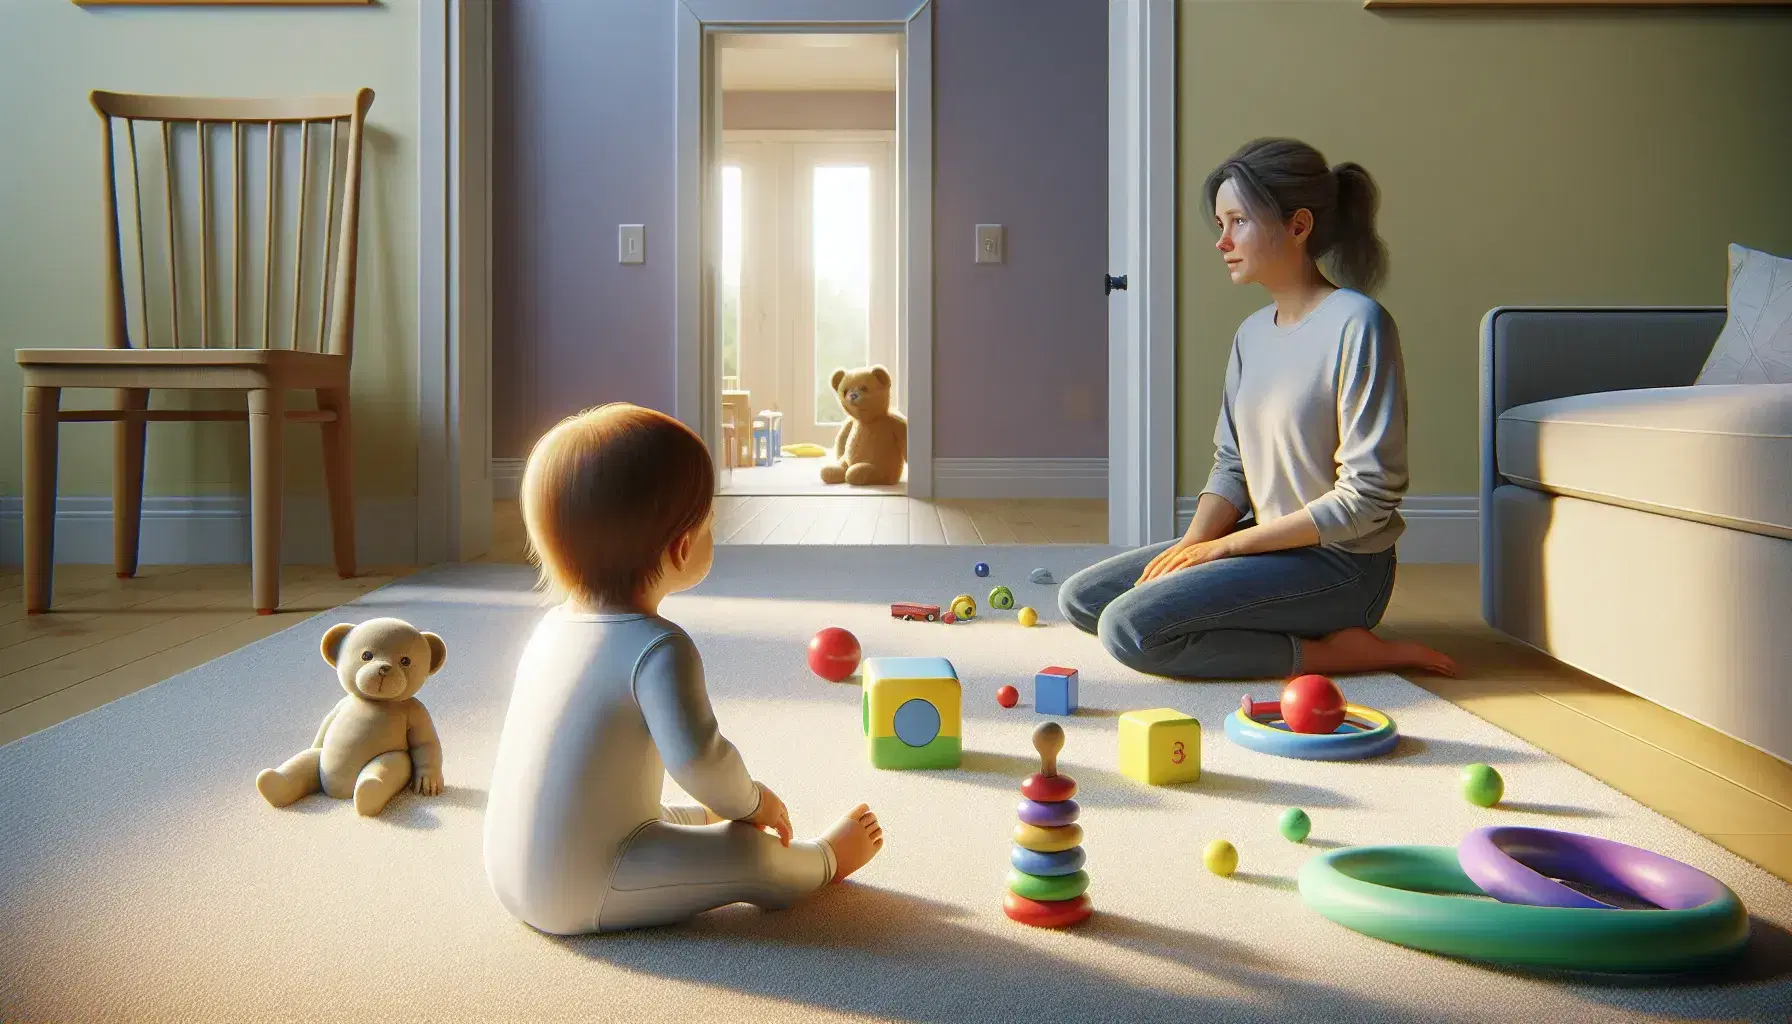 Newborn baby sitting on beige carpet with colorful toys, adult woman next to her in jeans and gray sweater, cozy and bright home environment.